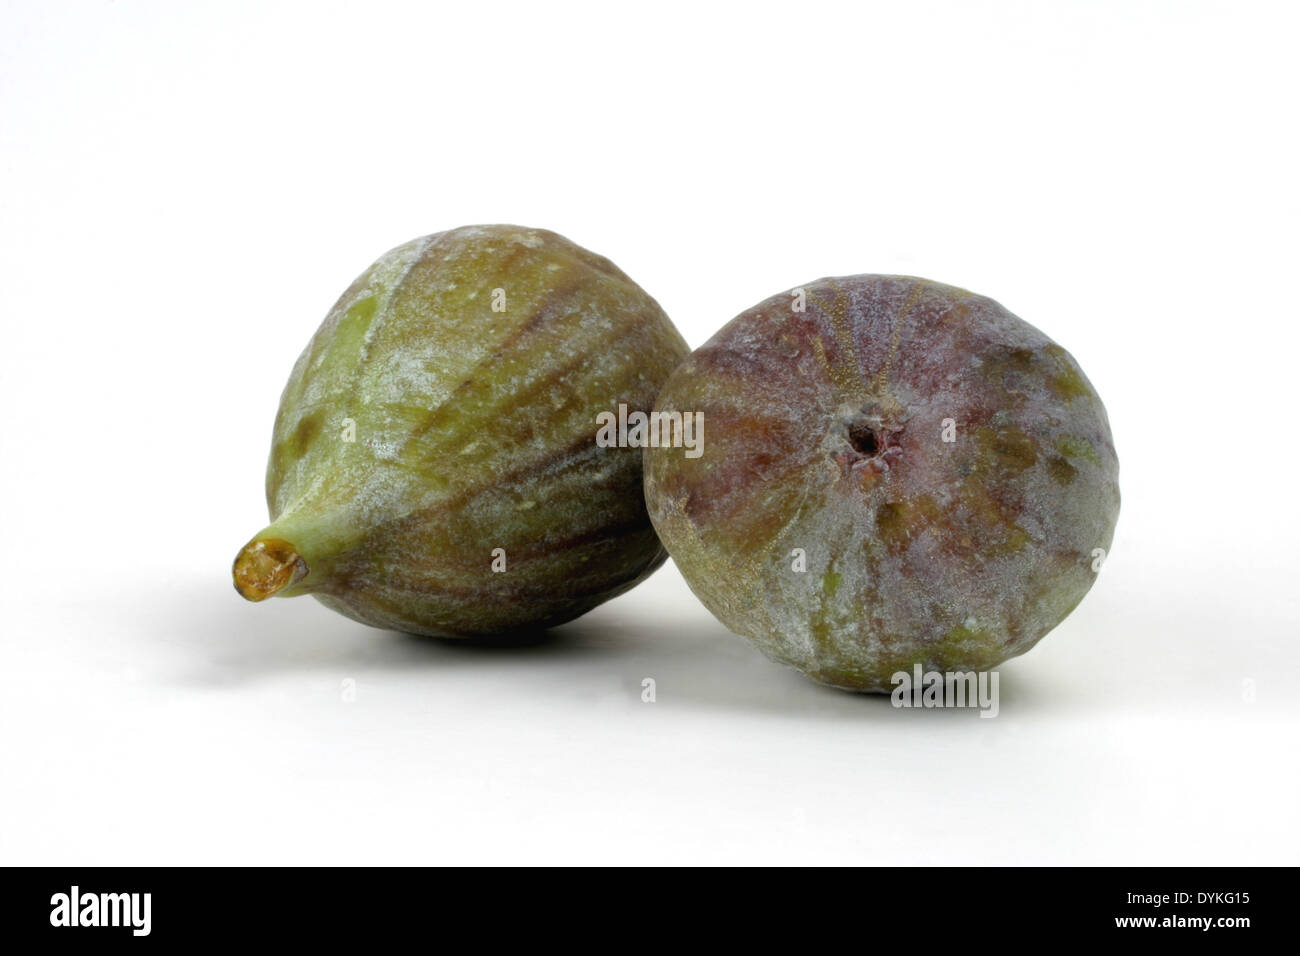 edible fig, common fig (Ficus carica) Stock Photo